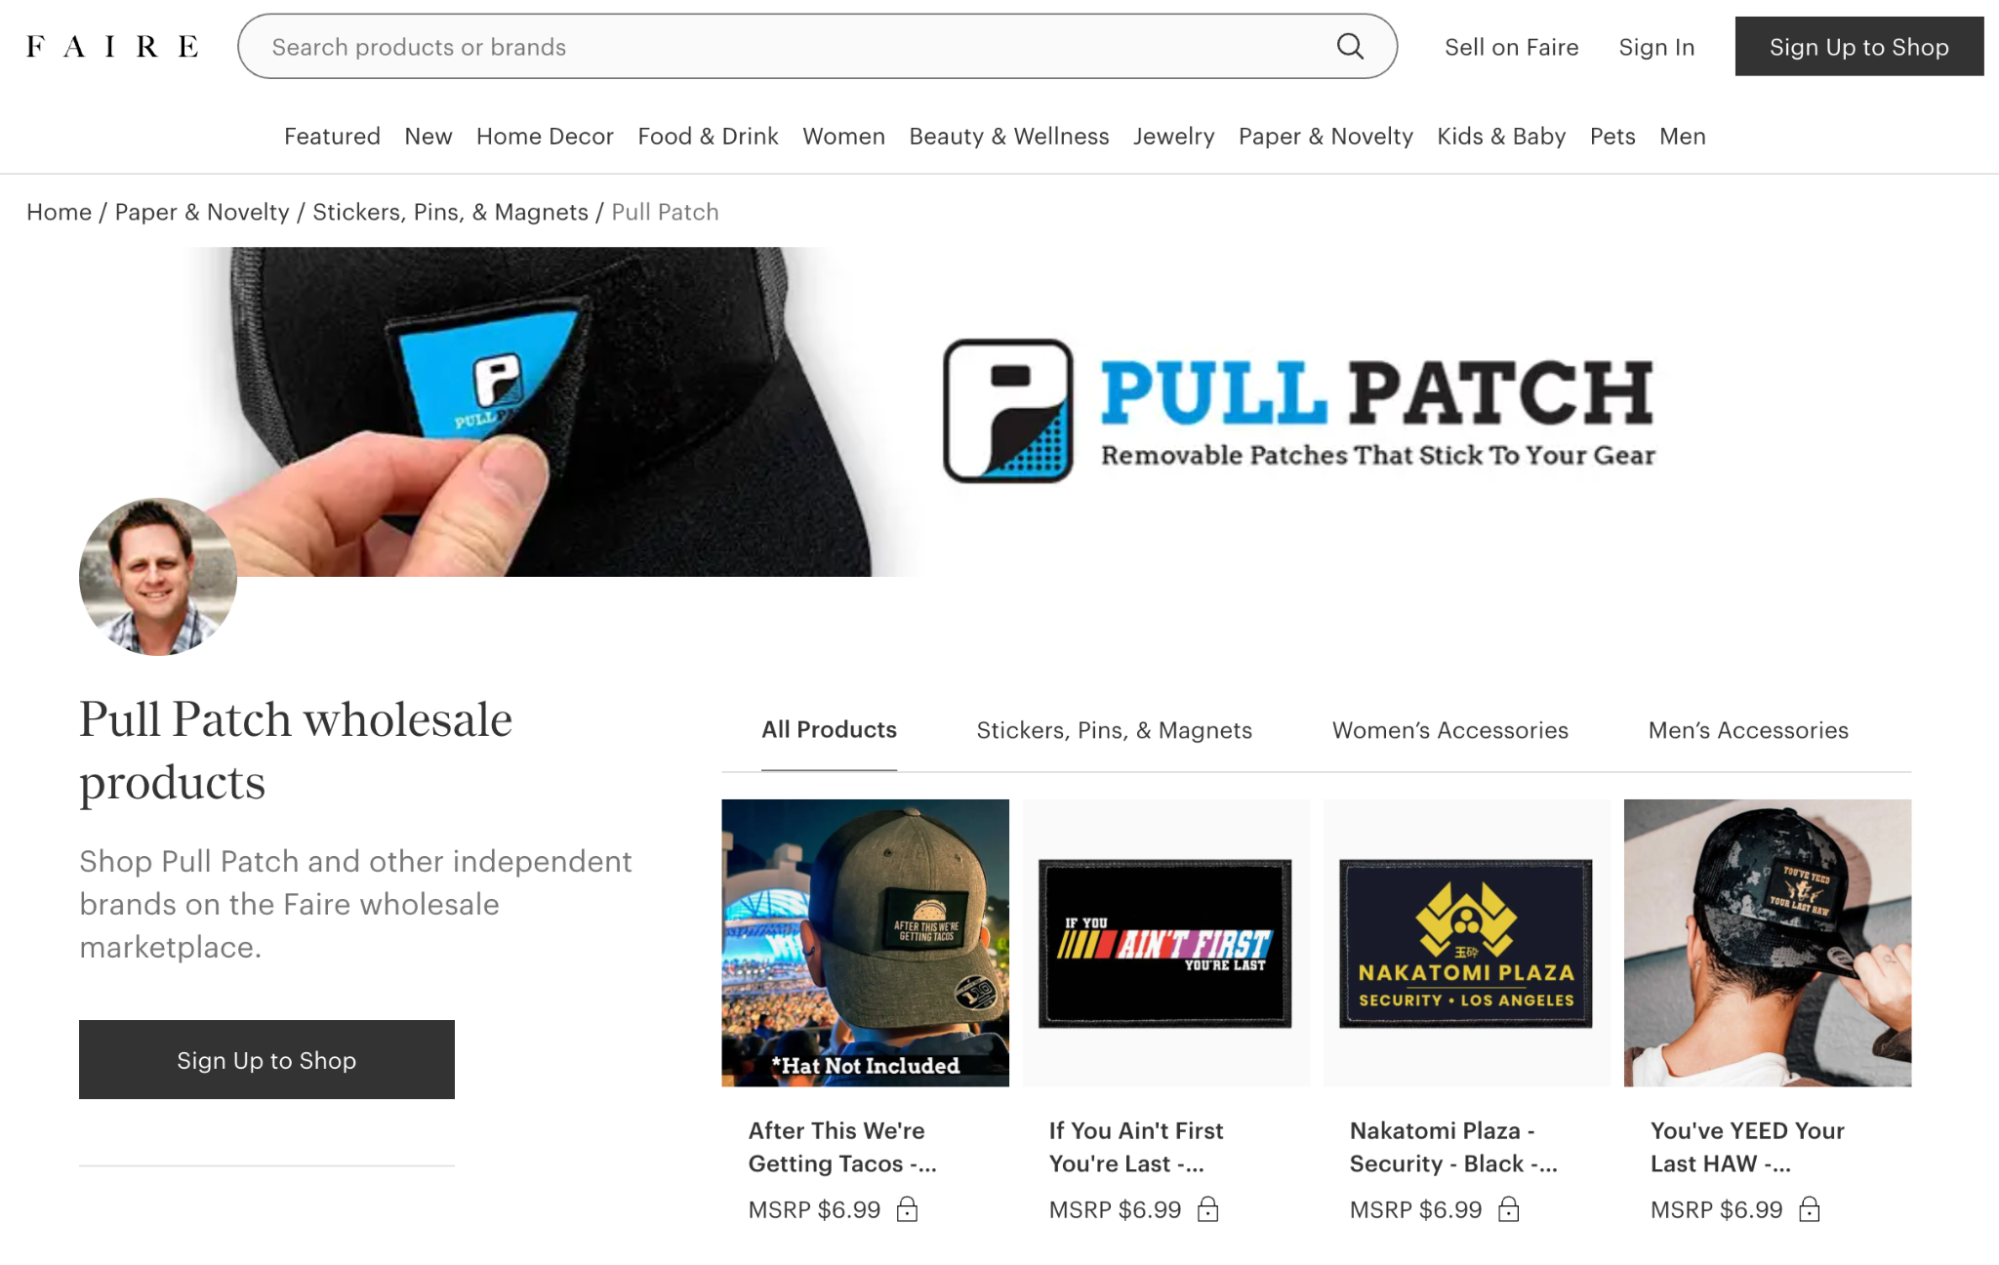 Image of Pull Patch profile page on Faire wholesale marketplace